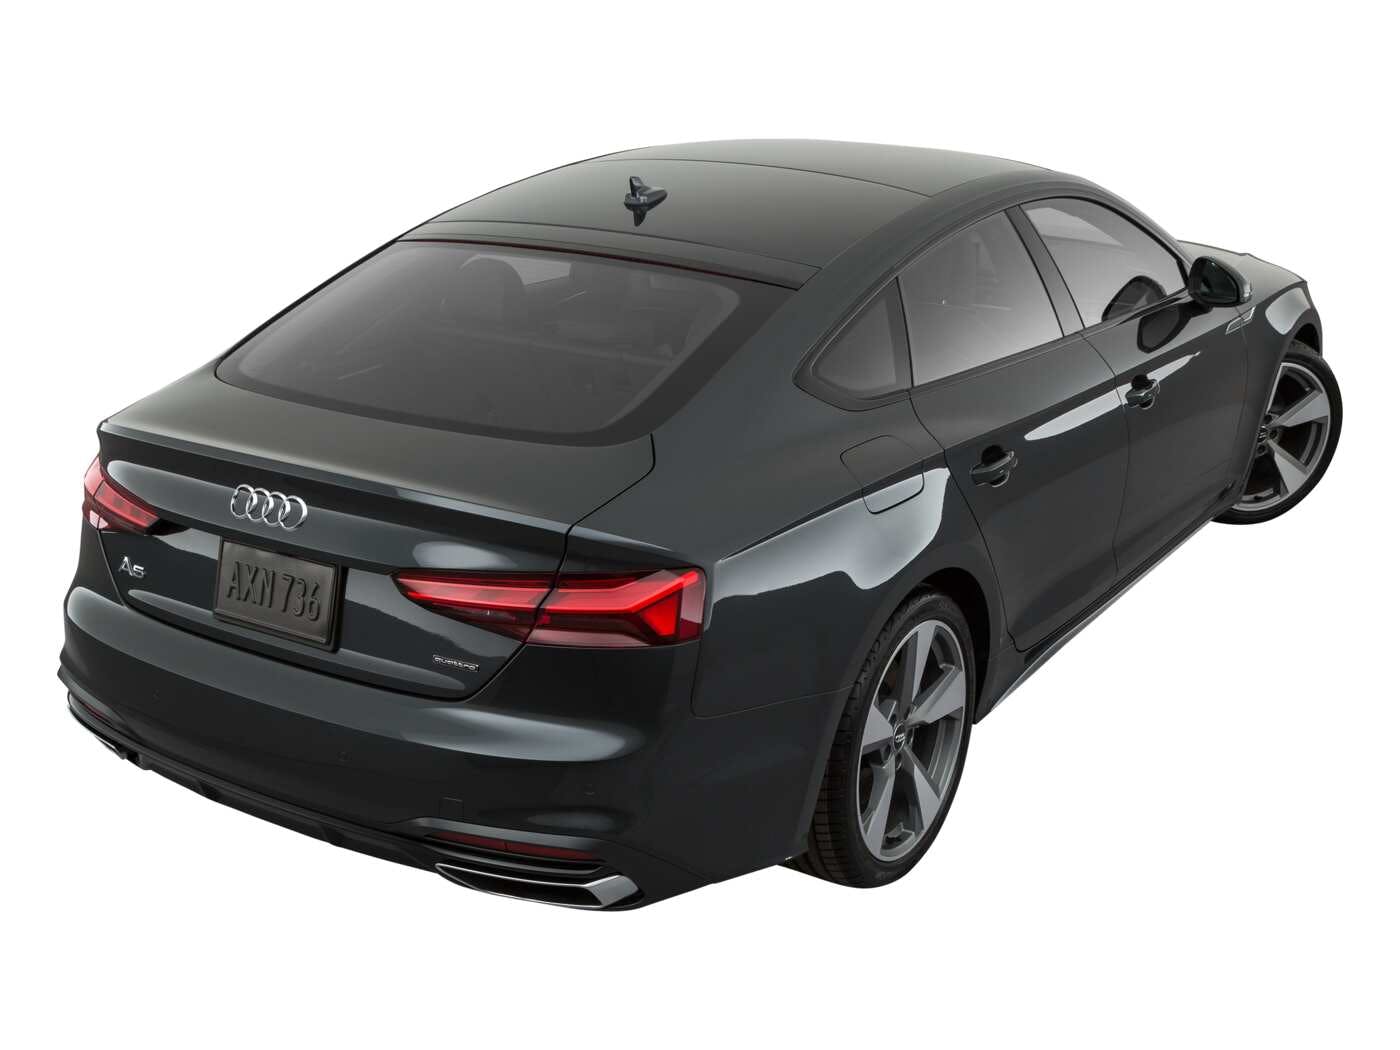 2020 Audi A5 Prices, Reviews, and Photos - MotorTrend